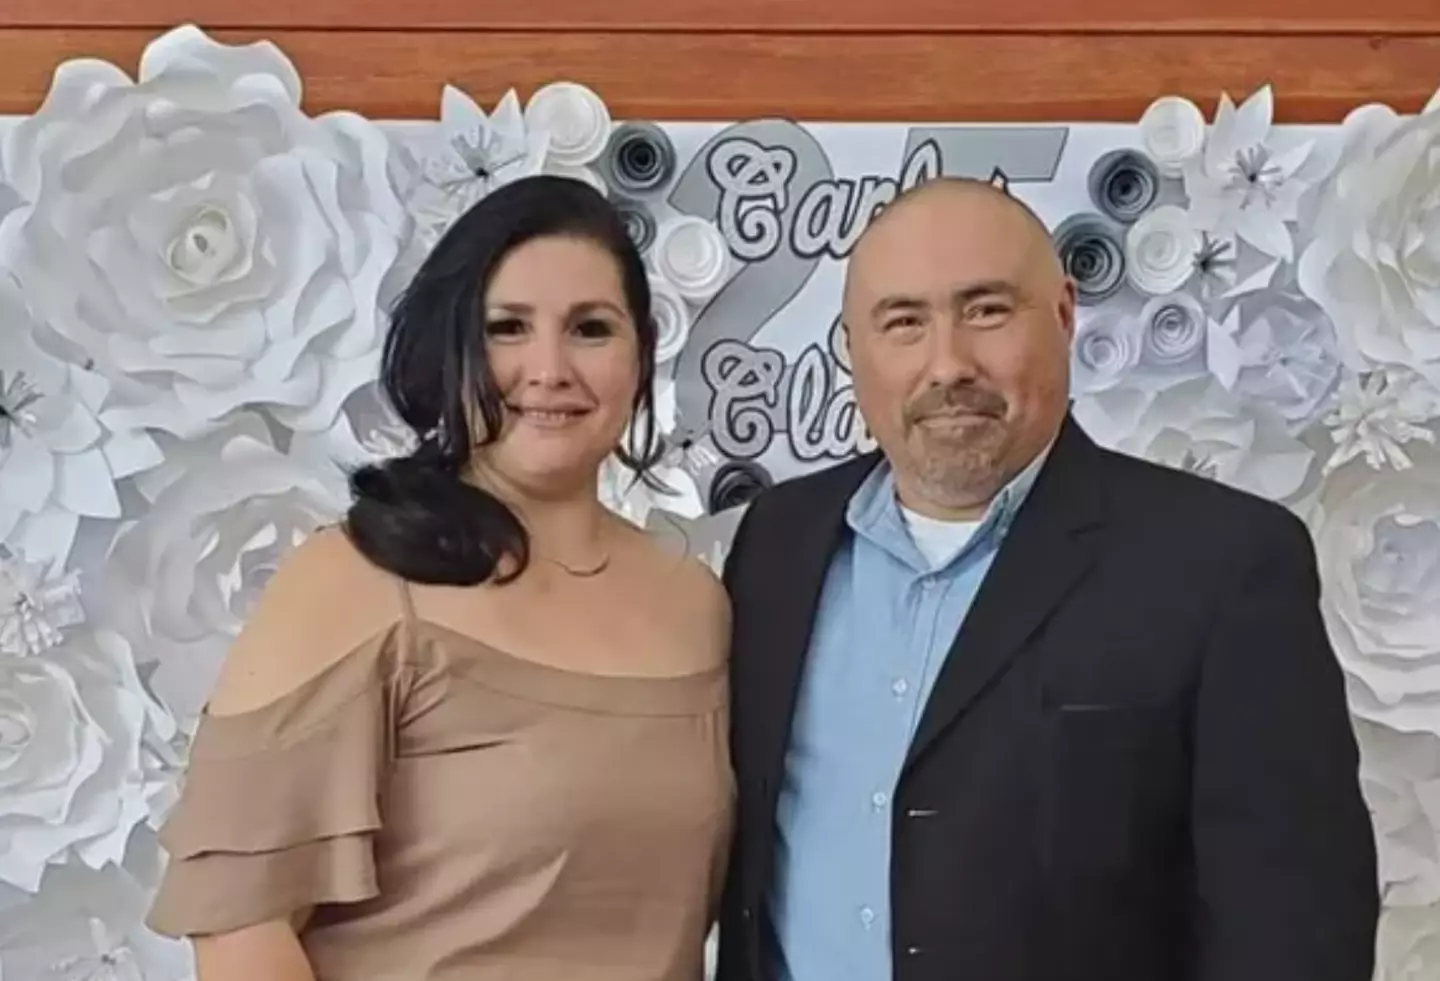 Uvalde schoolteacher Irma Garcia's husband has passed away two days after the shooting.